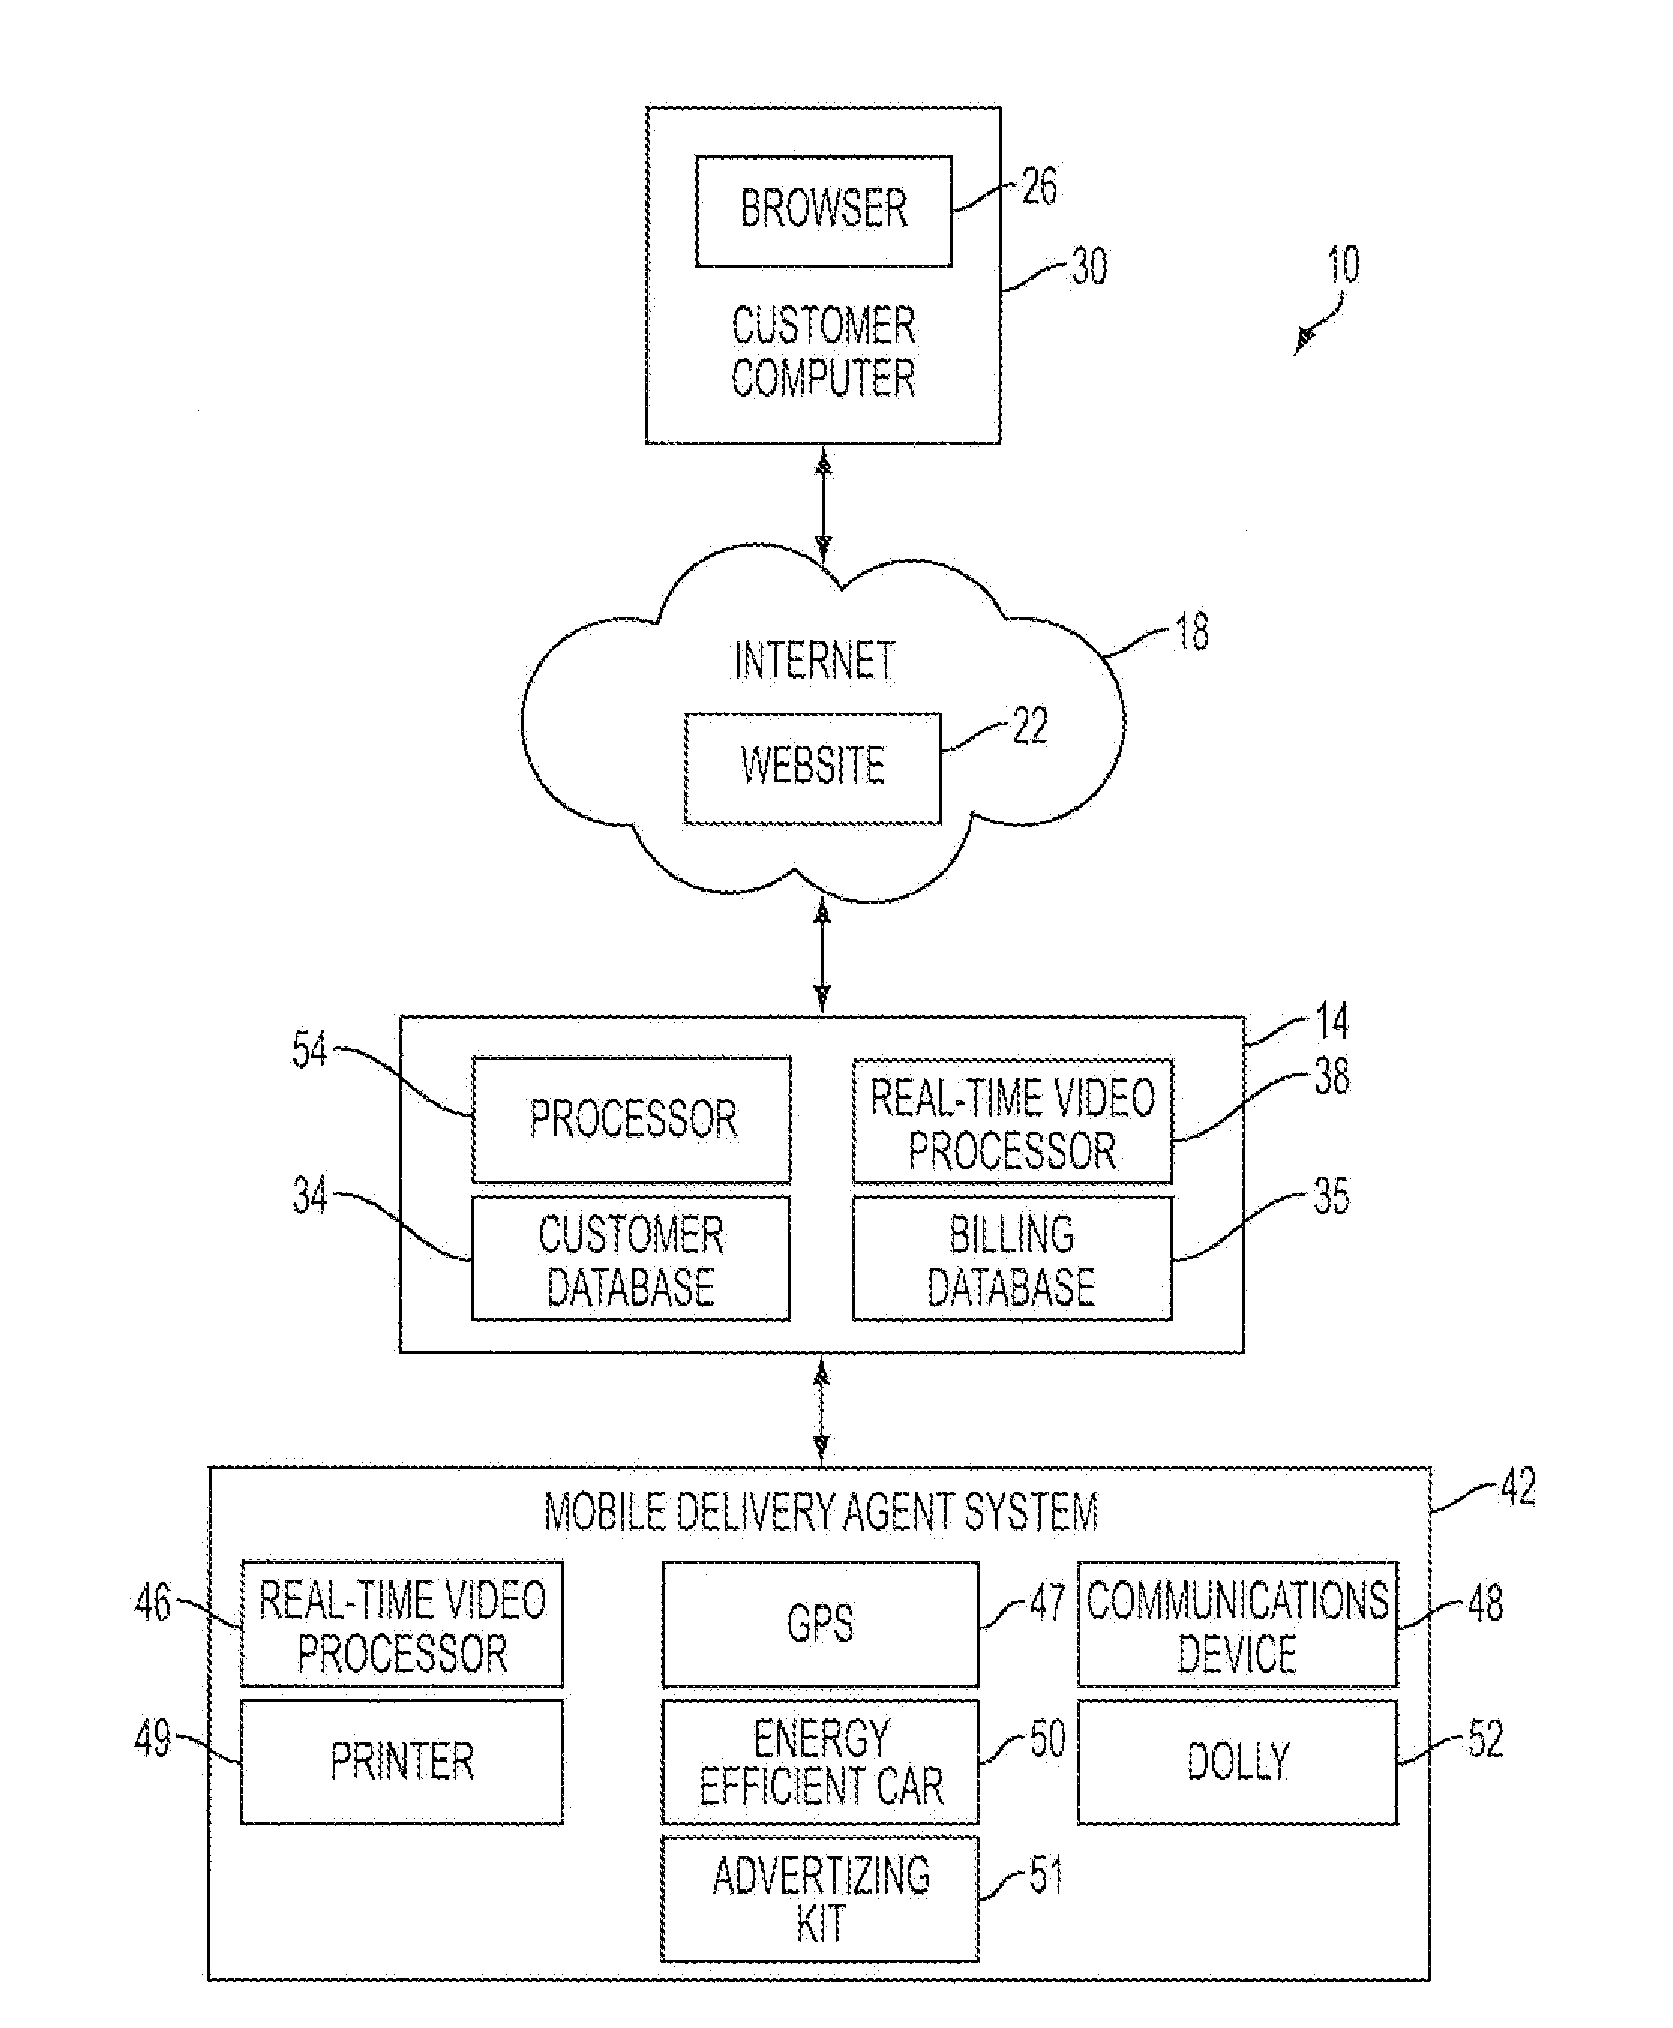 System and Method for Remote Acquisition and Delivery of Goods